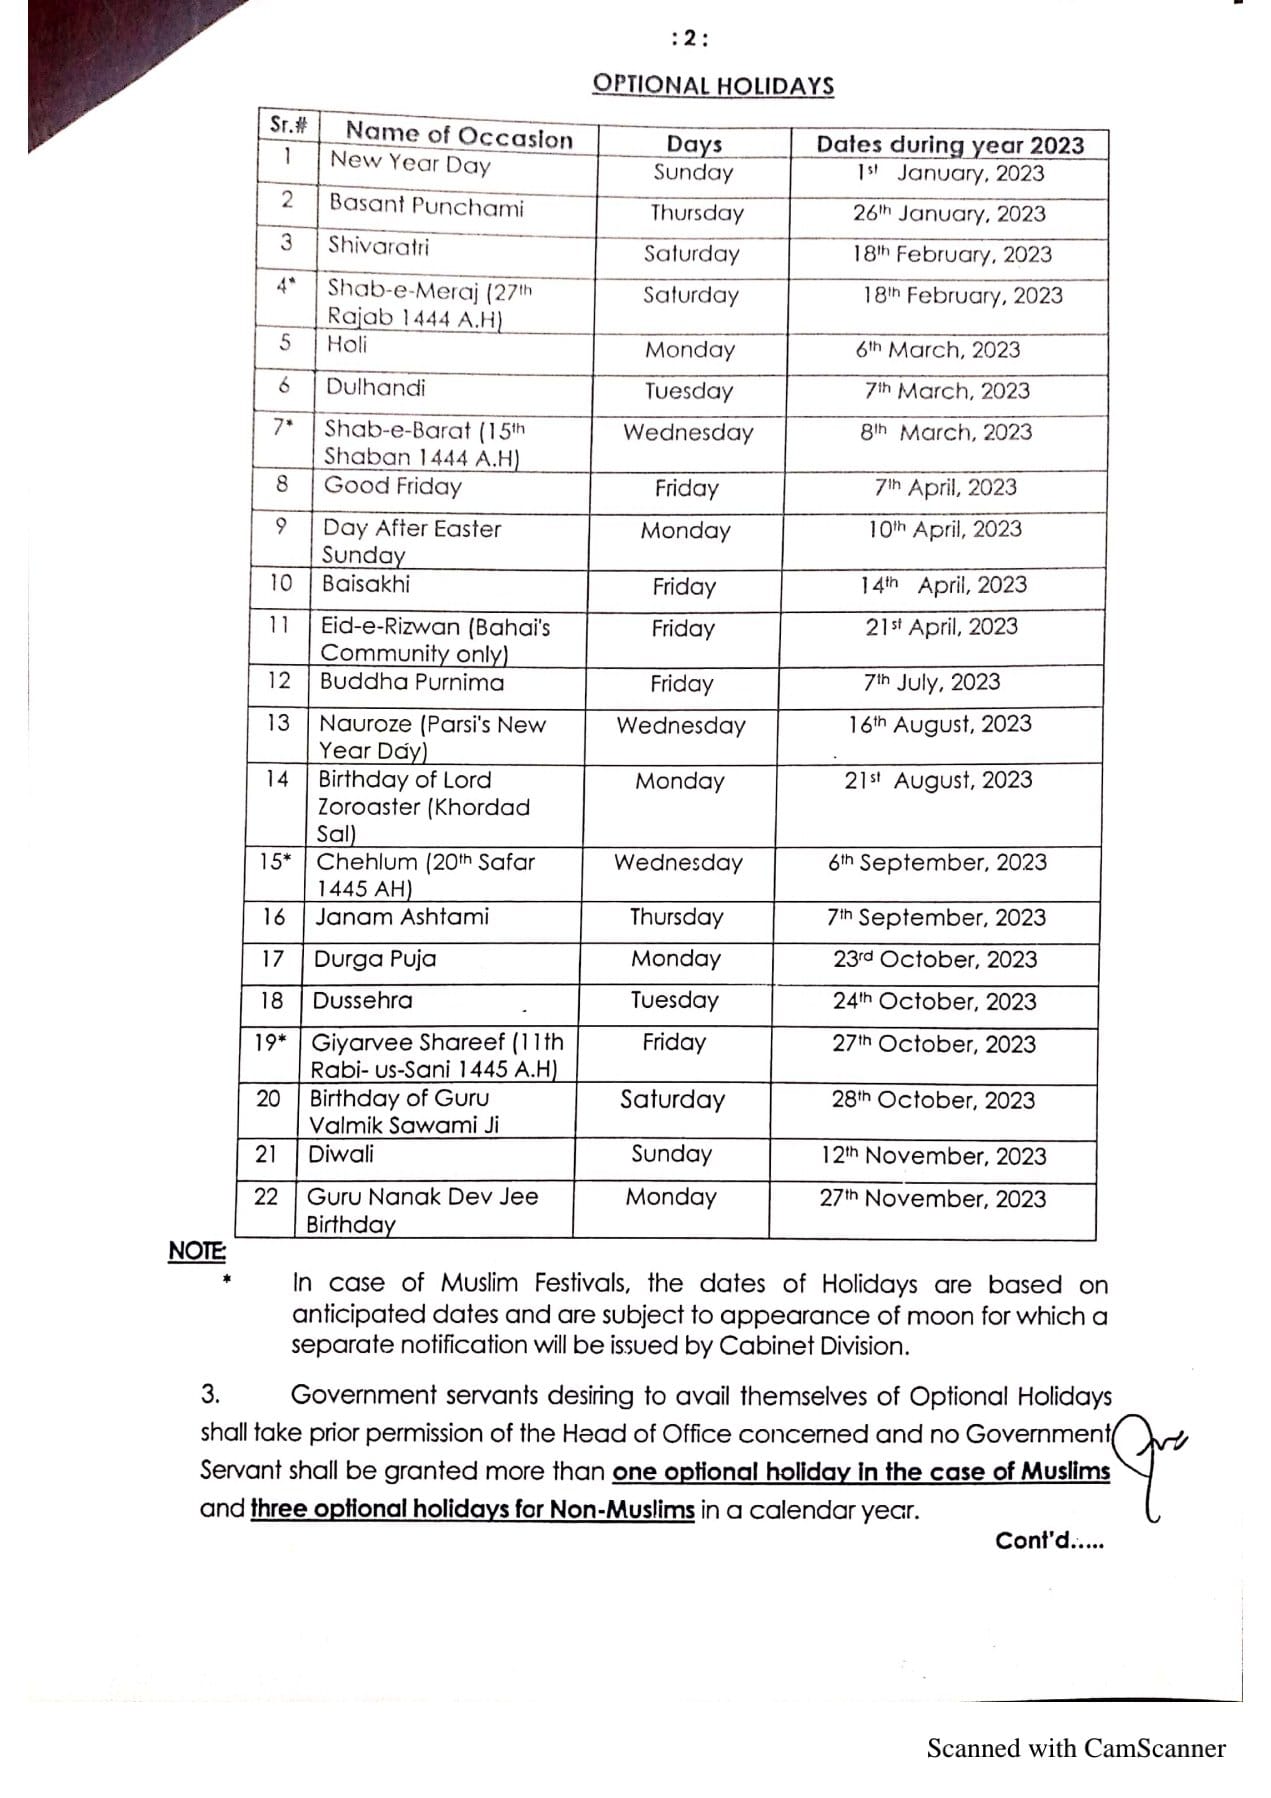 List of Optional Holidays 2023 in Pakistan